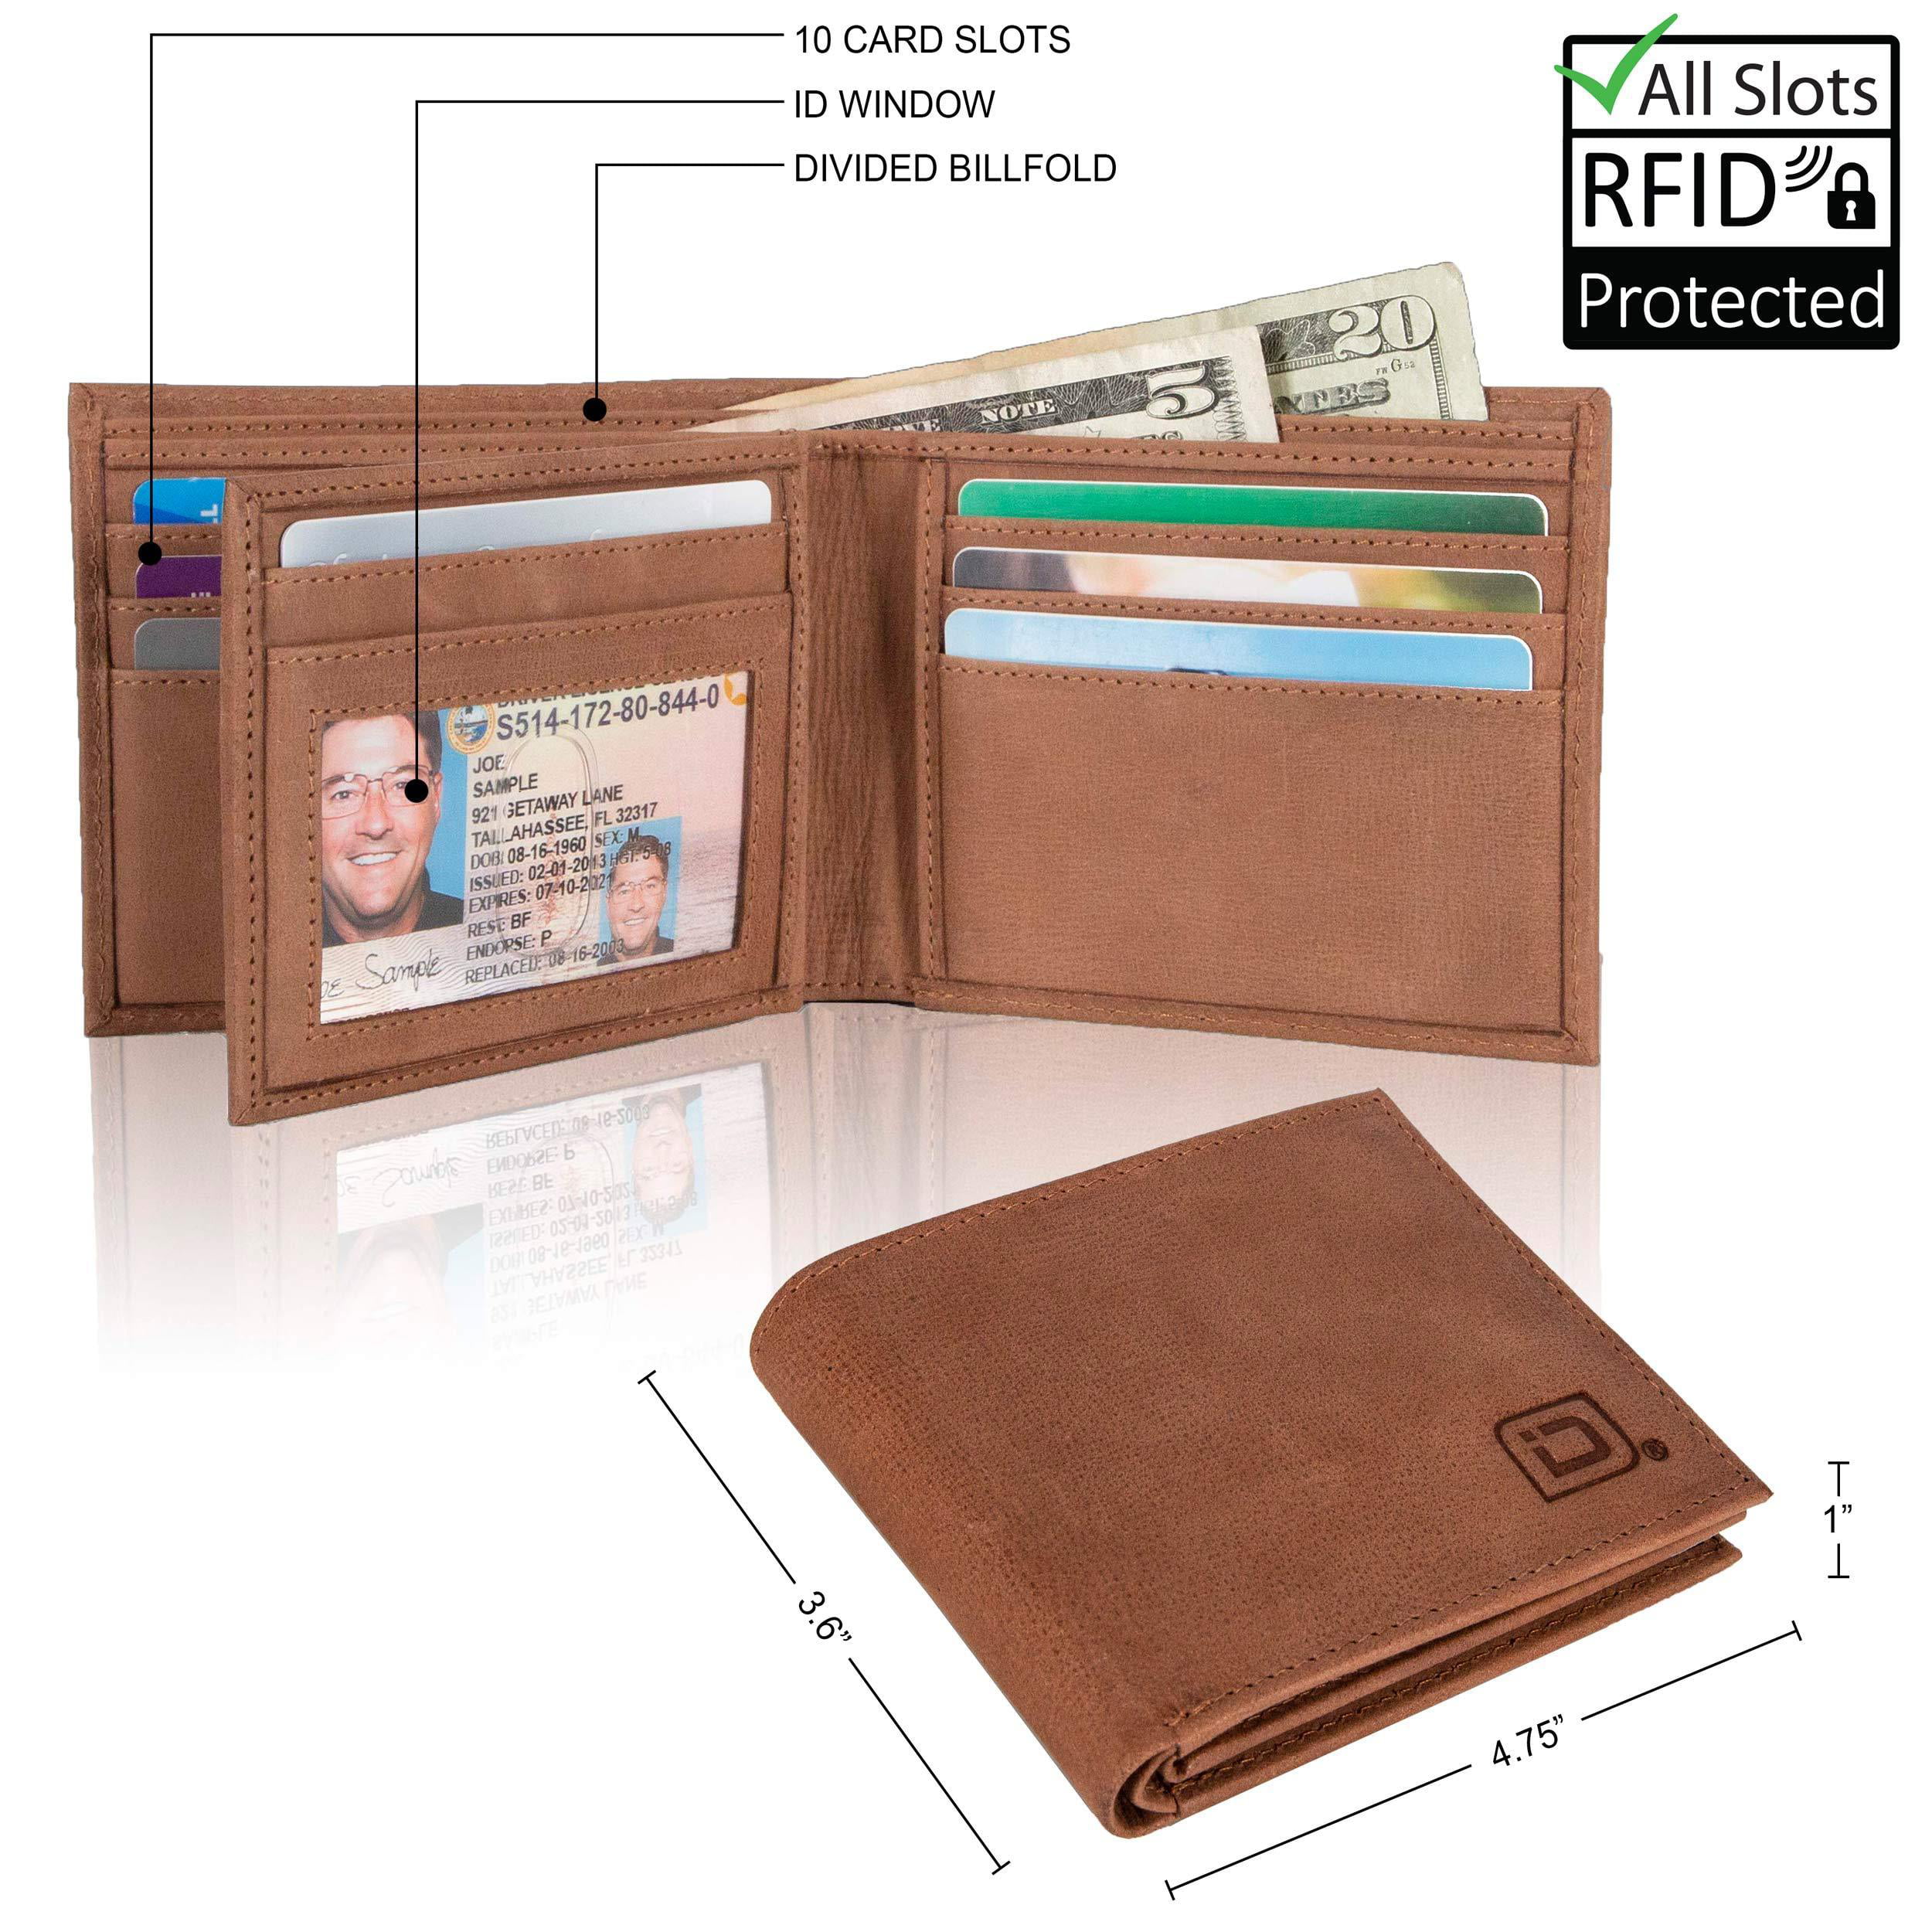 Buy WildHorn Brown Leather Wallet for Men I Top Grain Leather I 8 Credit  Card Slots I 2 Currency Compartments I 1 Coin Pocket I 1 Transparent ID  Window Online at Best